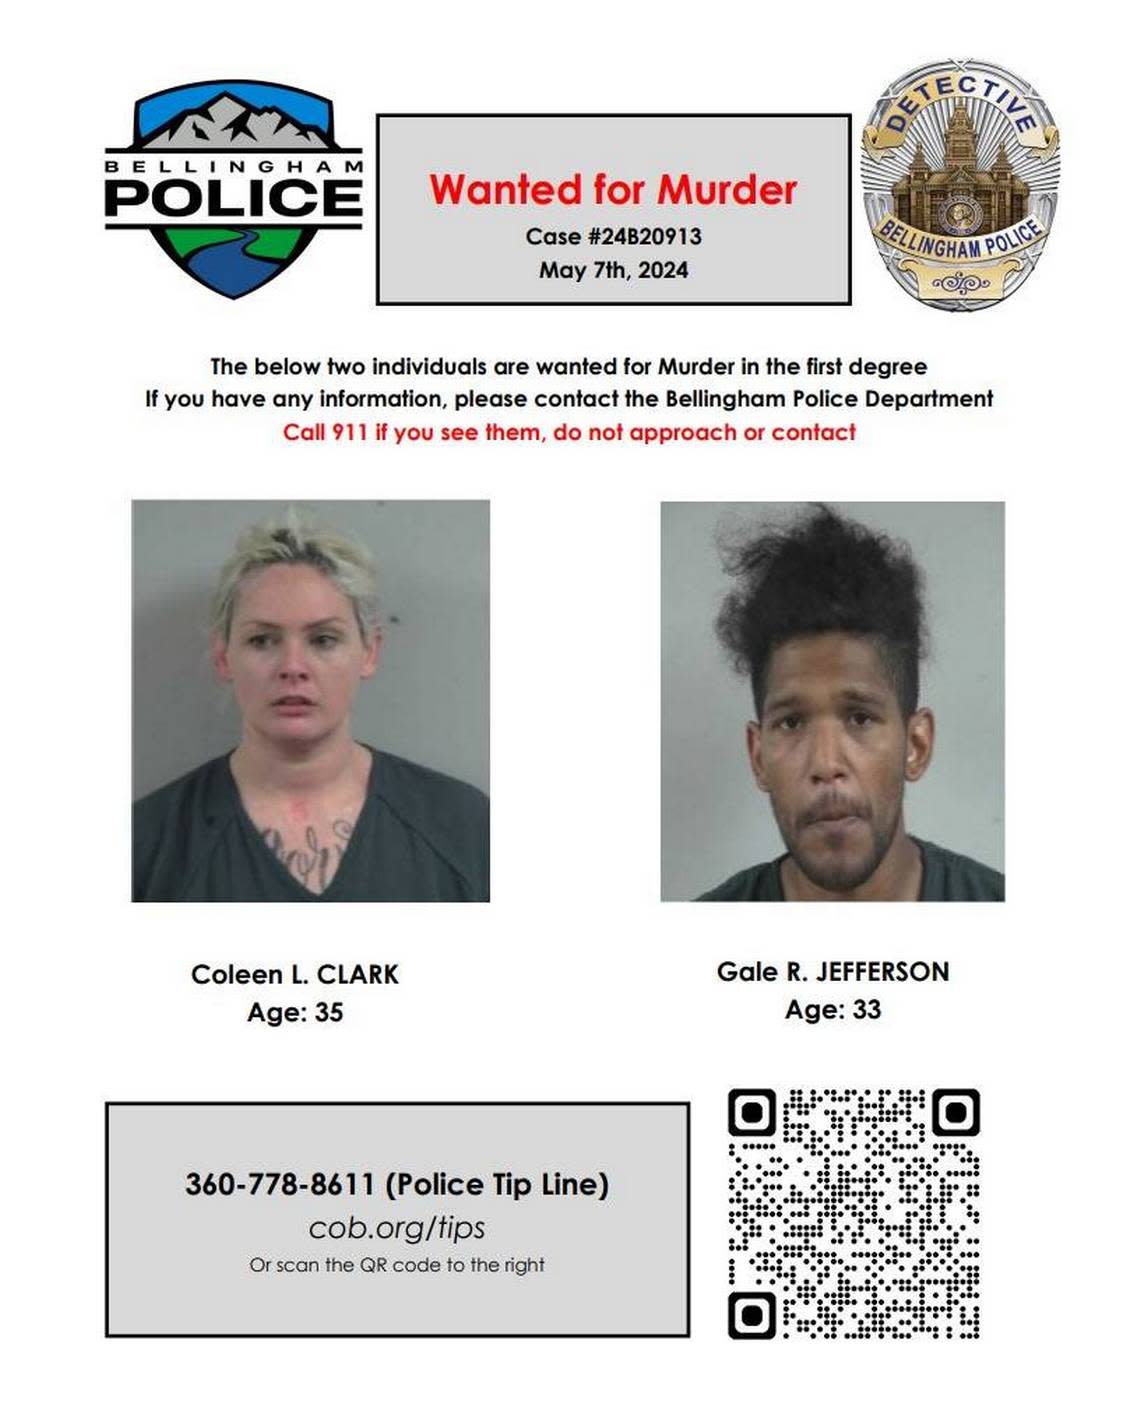 Bellingham Police released these photos of Coleen L. Clark and Gale R. Jefferson, who are are wanted in connection with the death of Zachariah Janusiewicz.